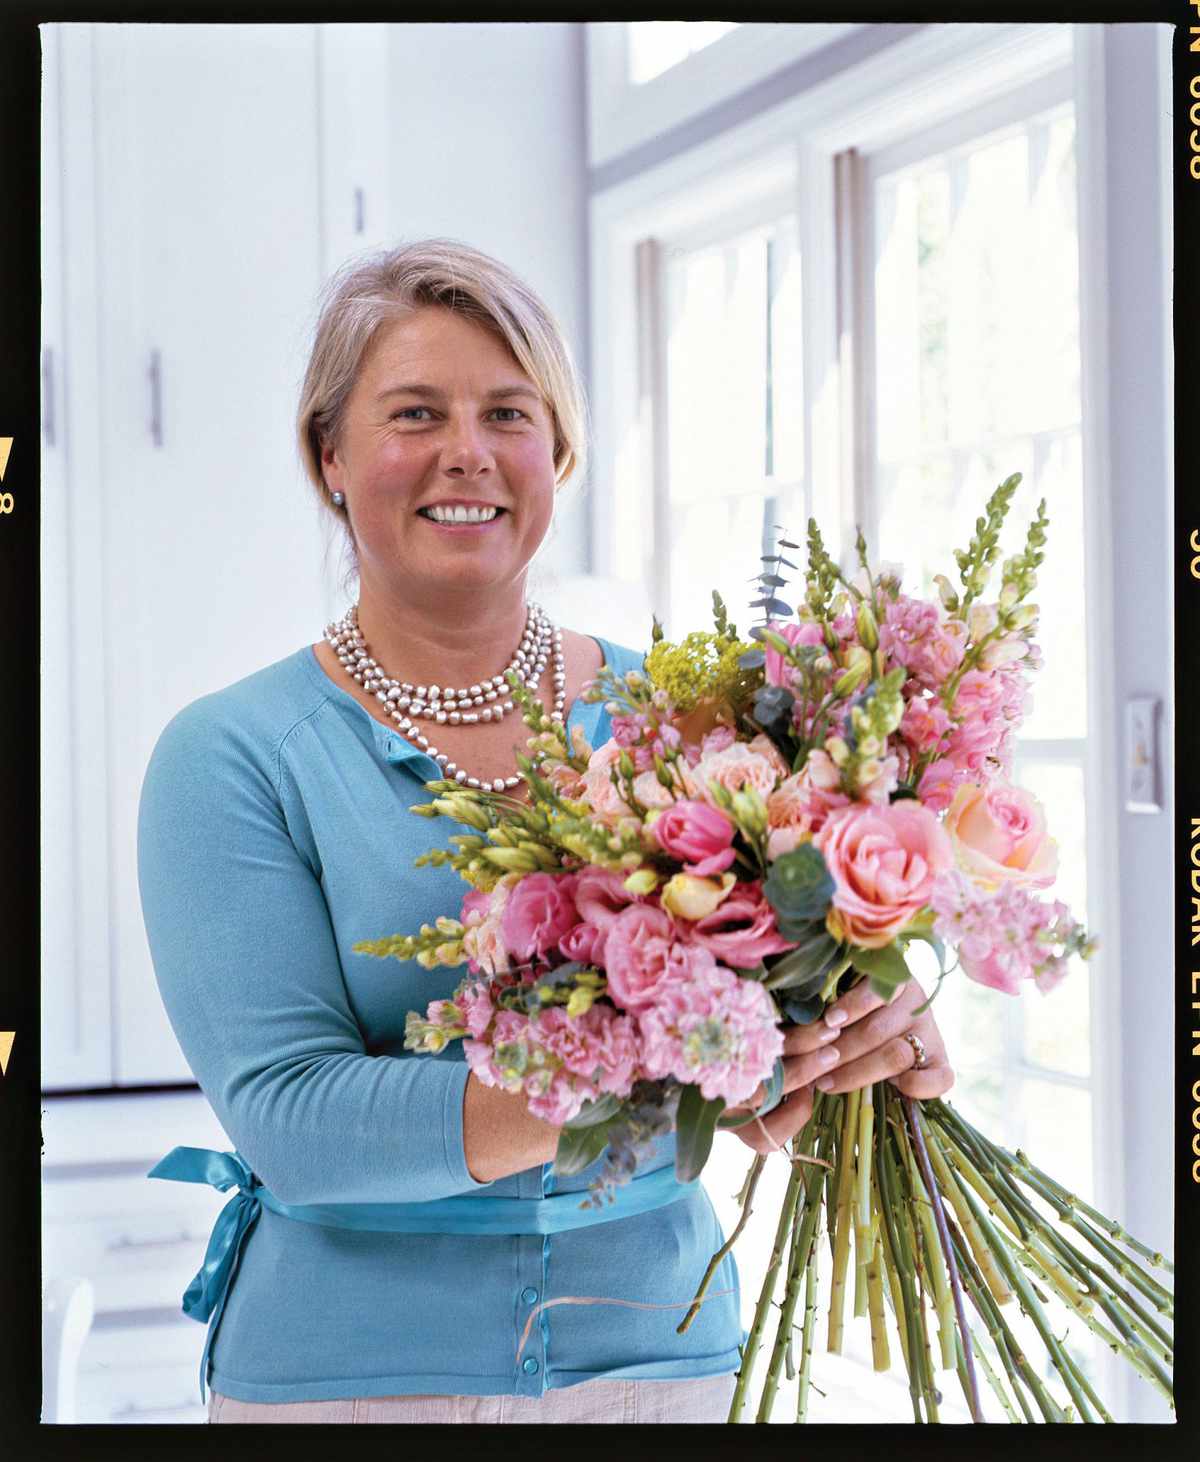 Our Floral Expert